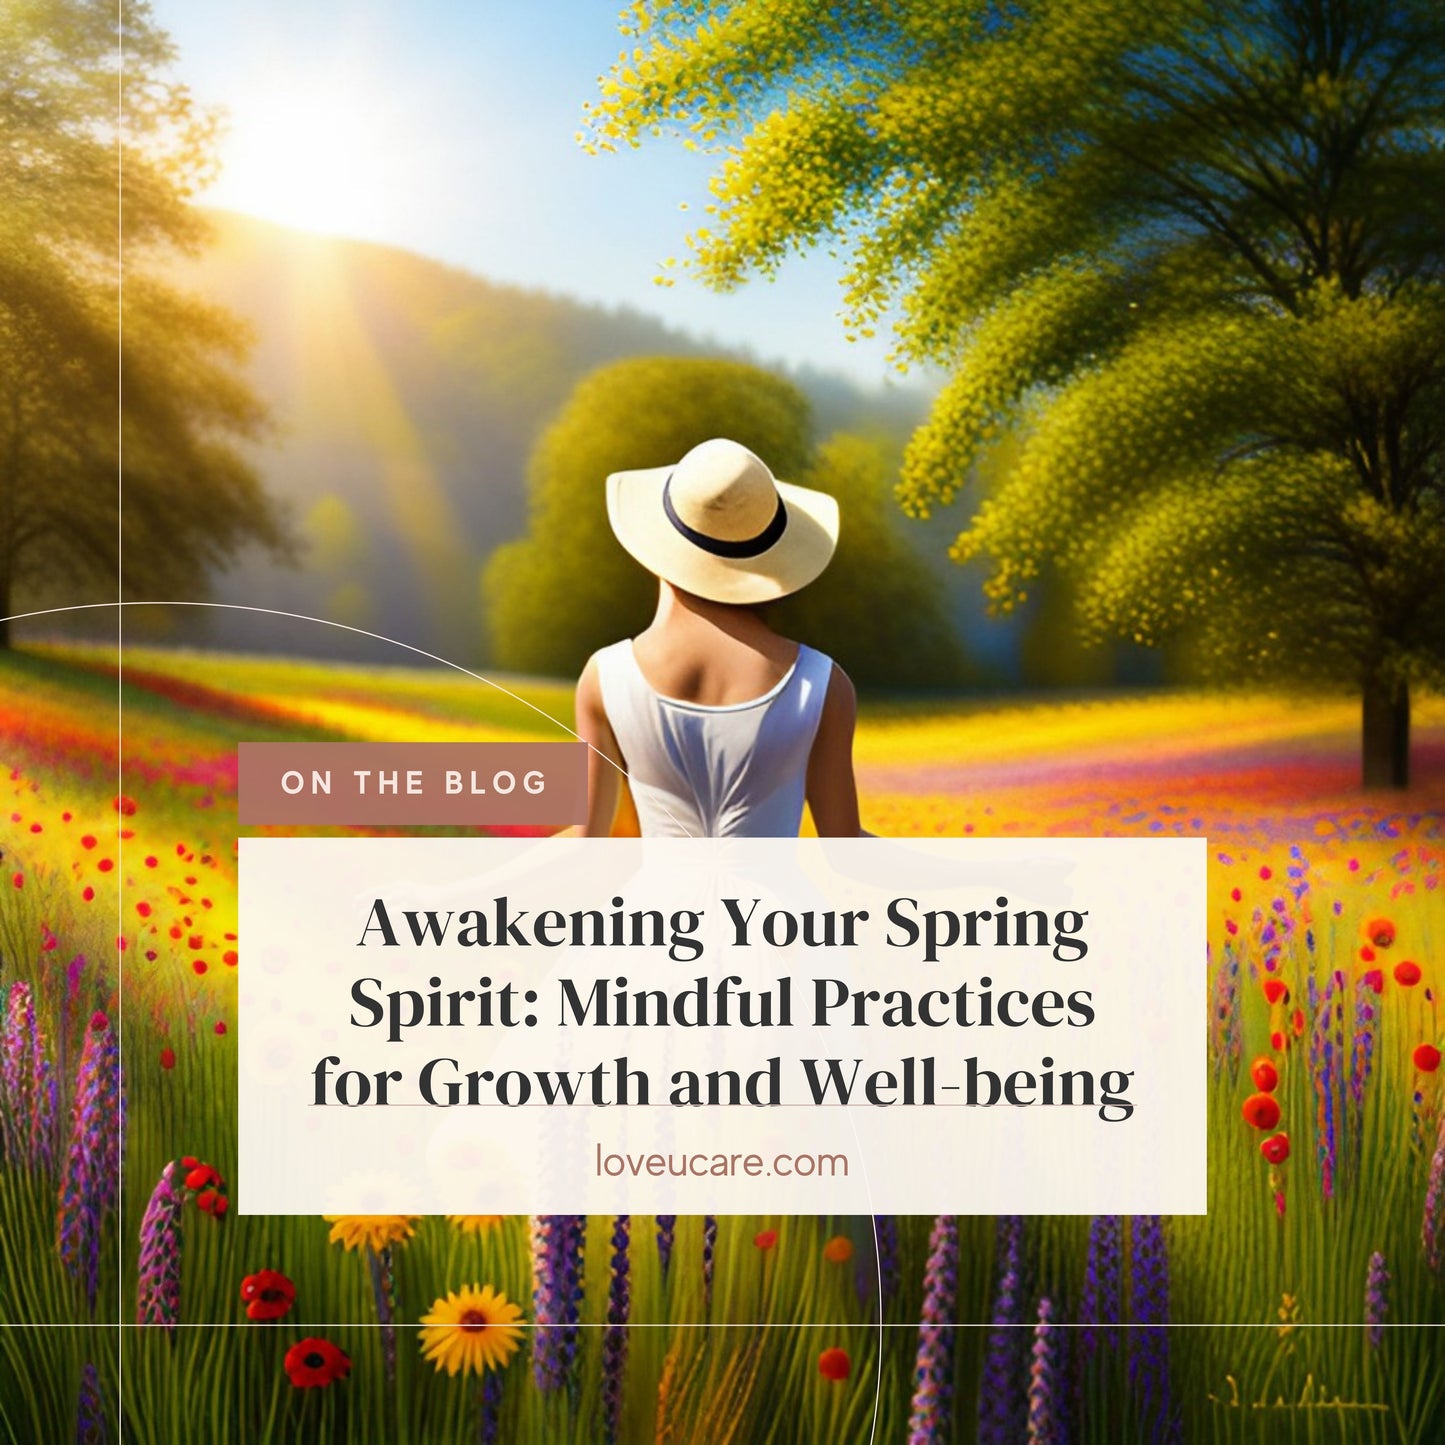 Spring Into Wellness - Aligning Your Self-Care Routine with the Season of Renewal